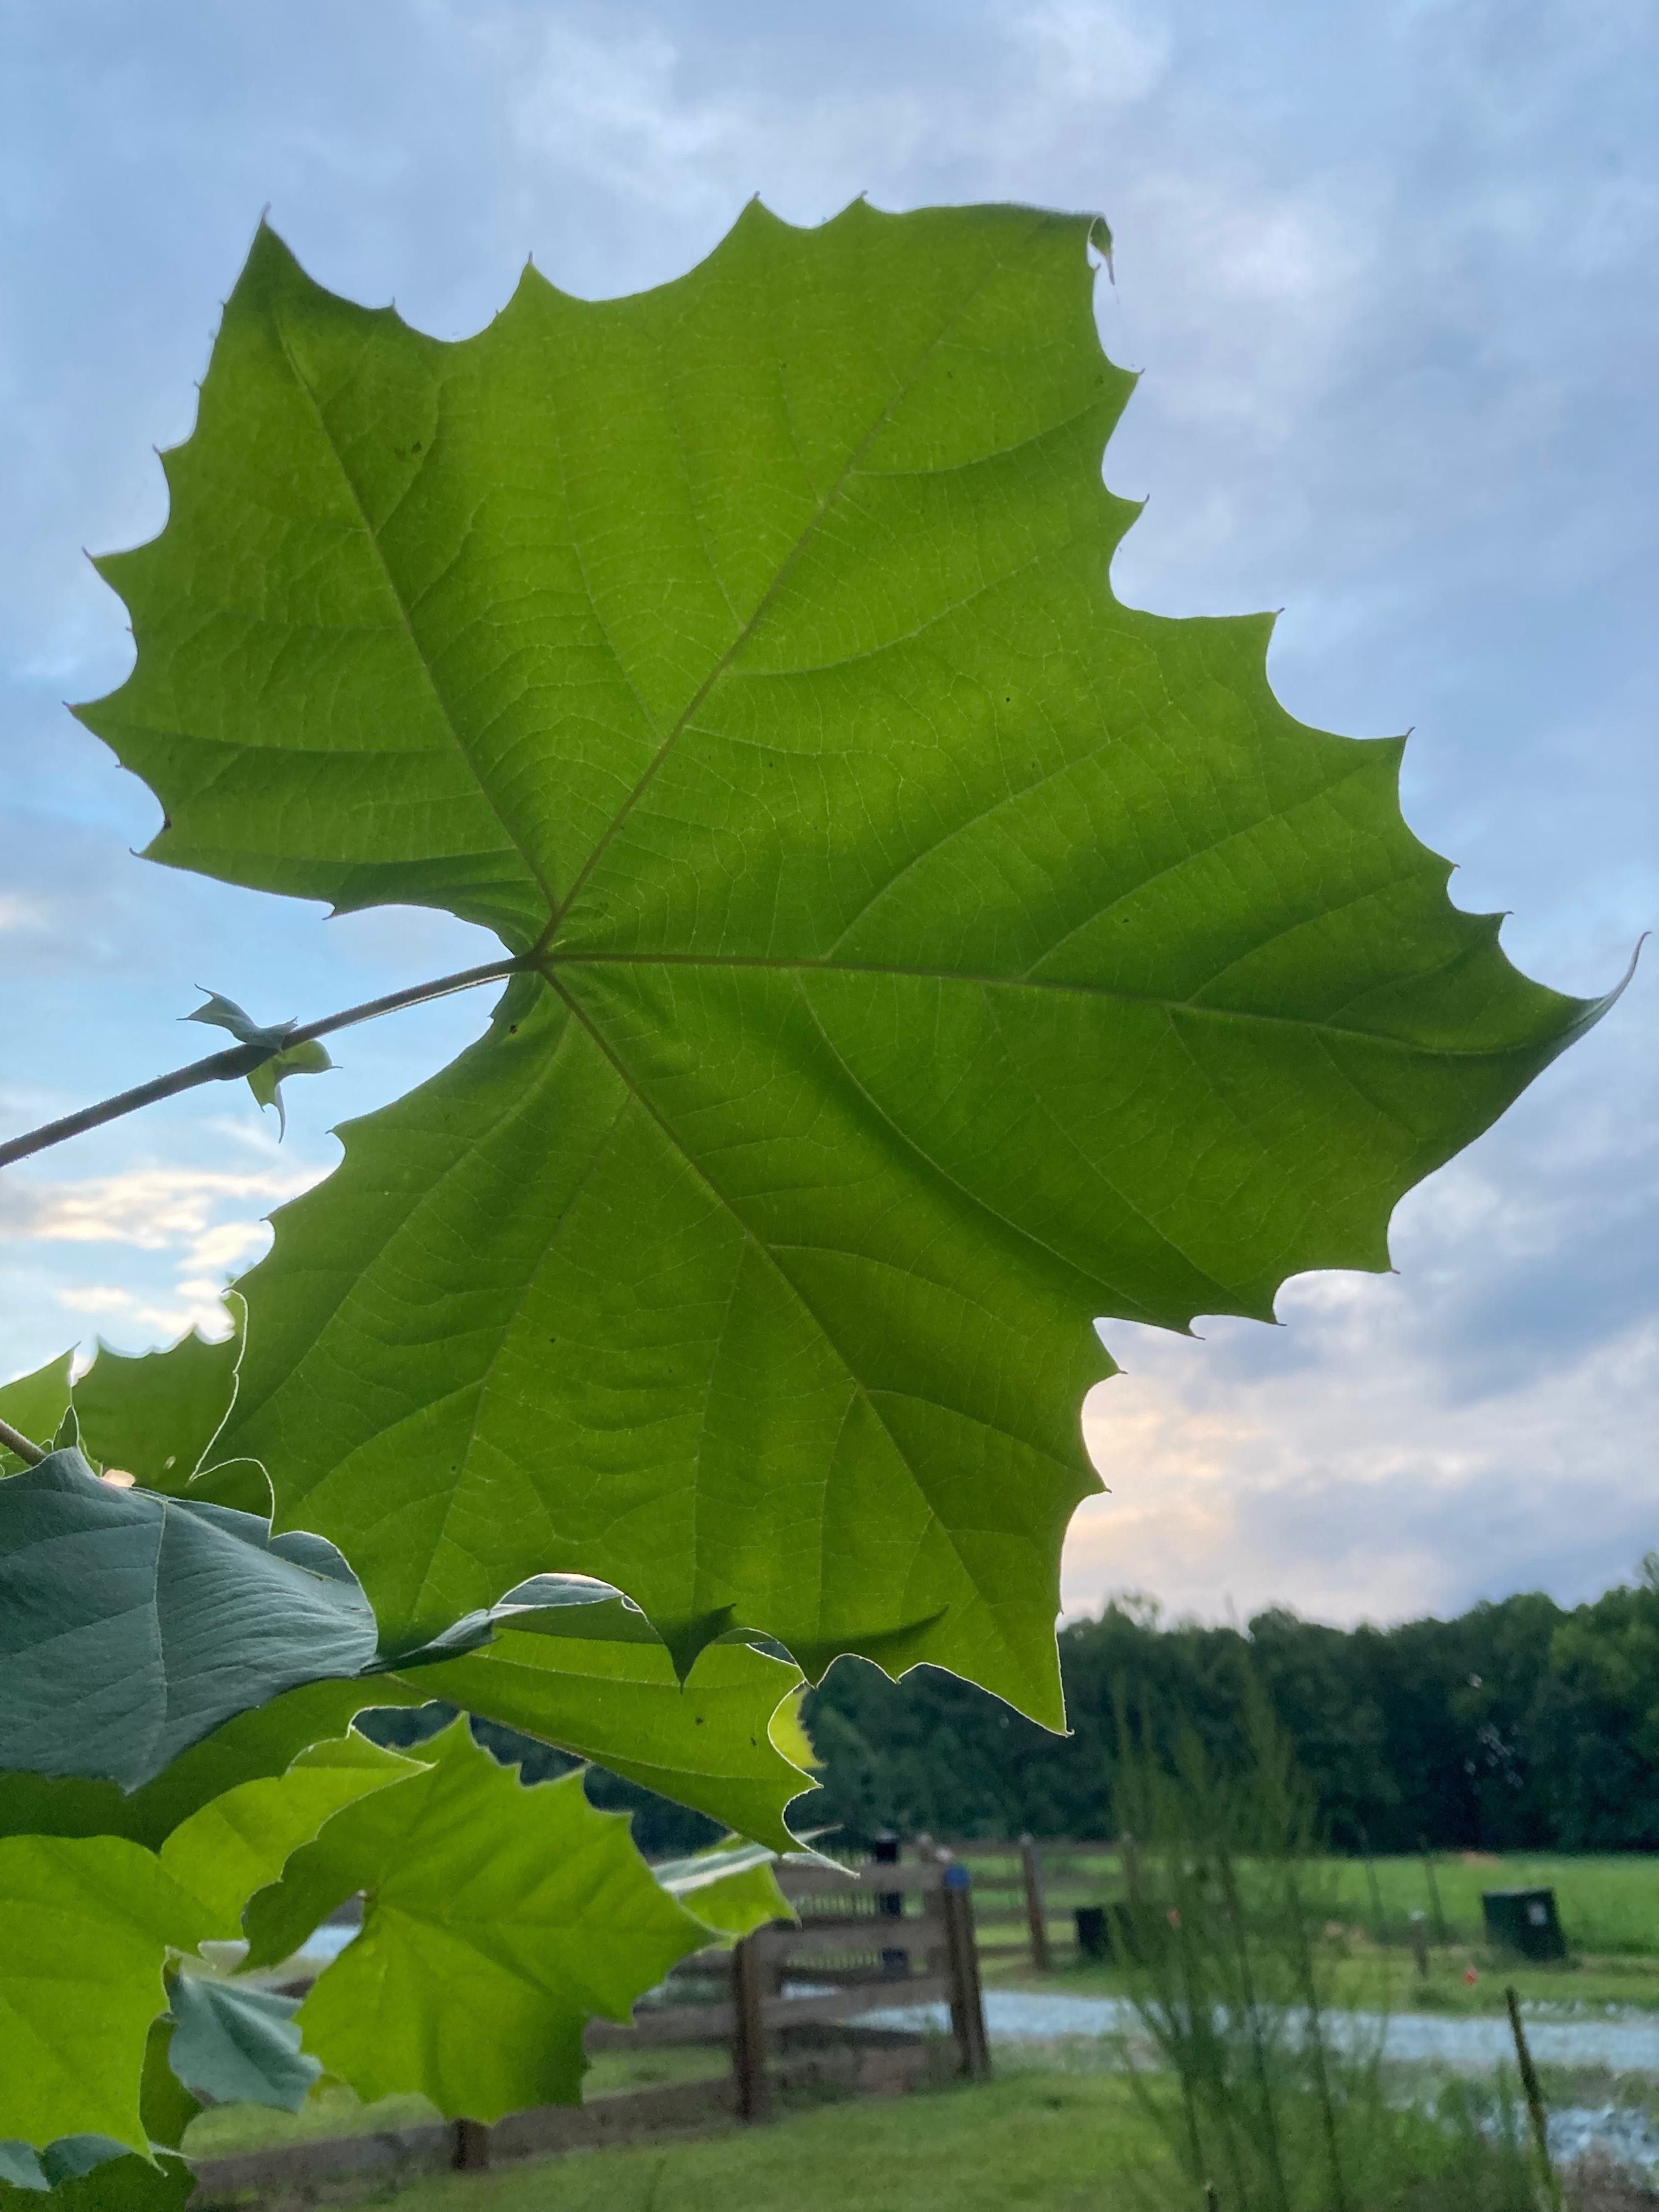 The Scientific Name is Platanus occidentalis. You will likely hear them called American Sycamore. This picture shows the Large leaves, 3-5 lobed , with sharply serrated margins. of Platanus occidentalis